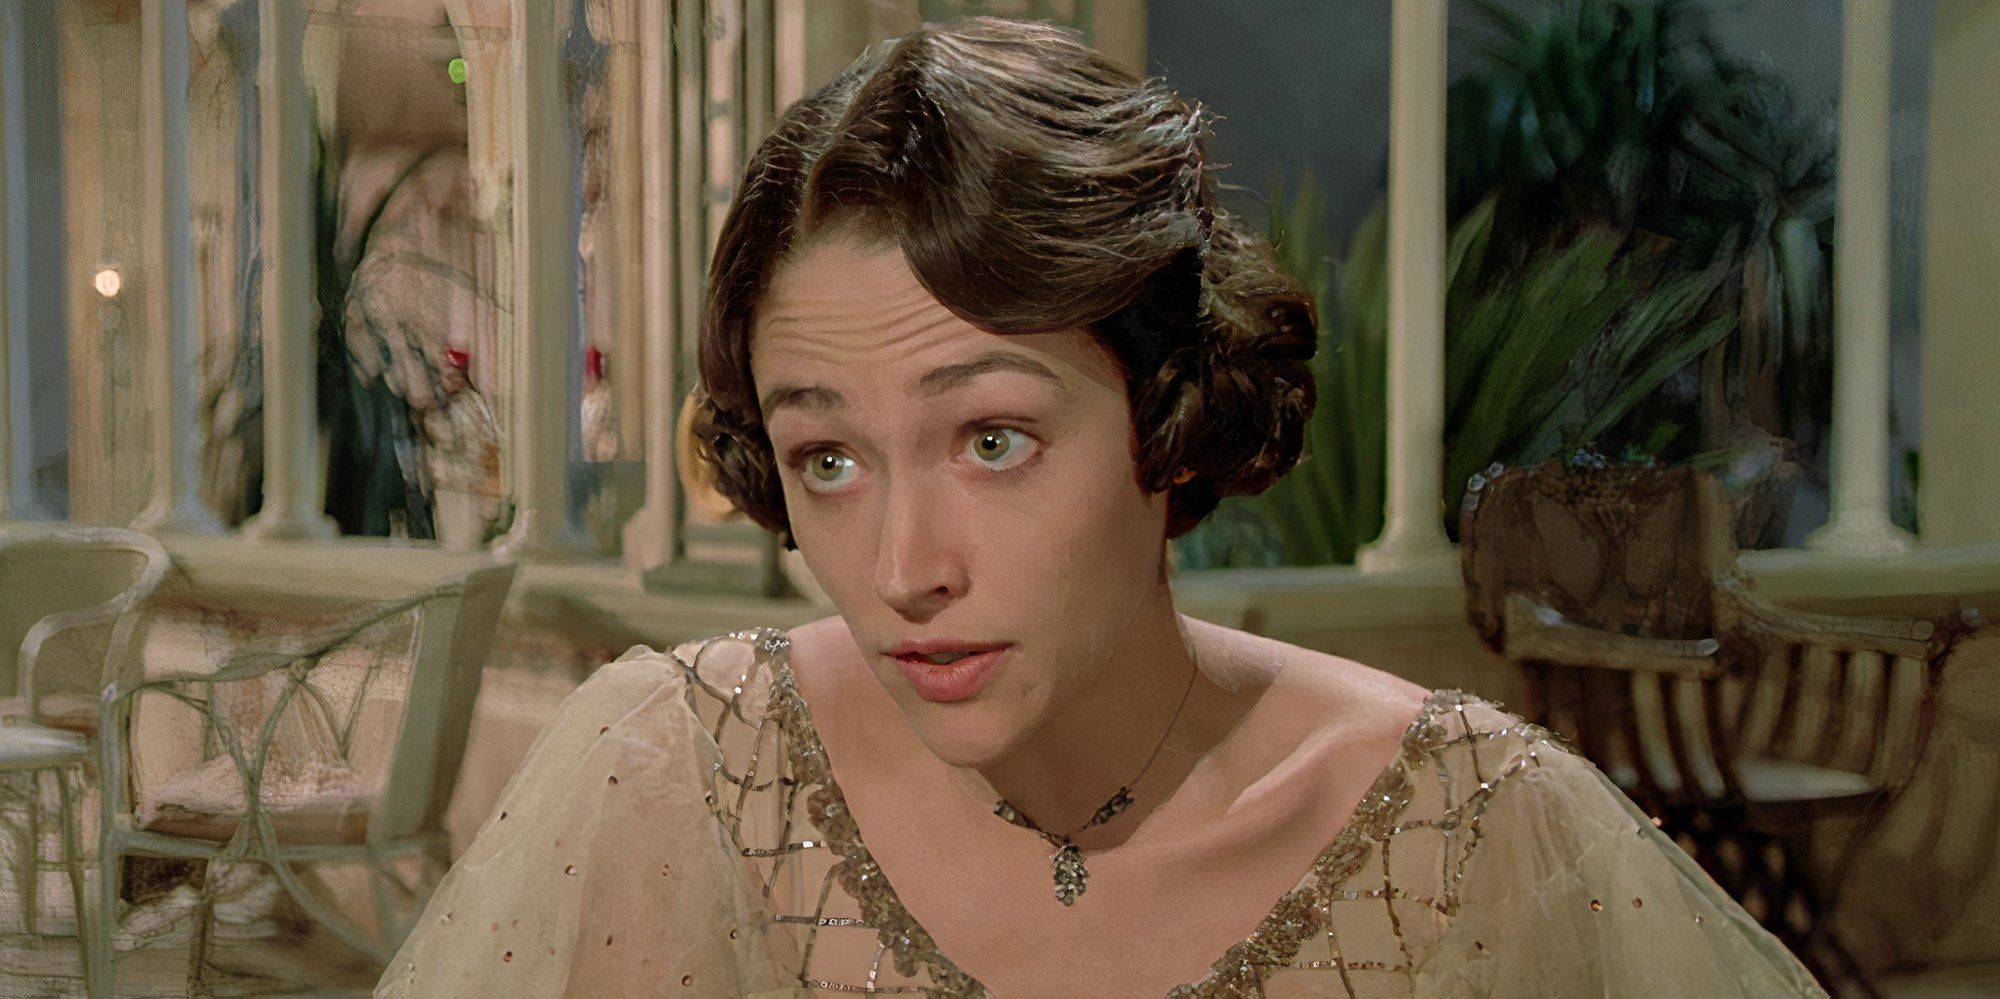 Olivia Hussey as Rosalie in Death on the Nile talking with someone off-camera.